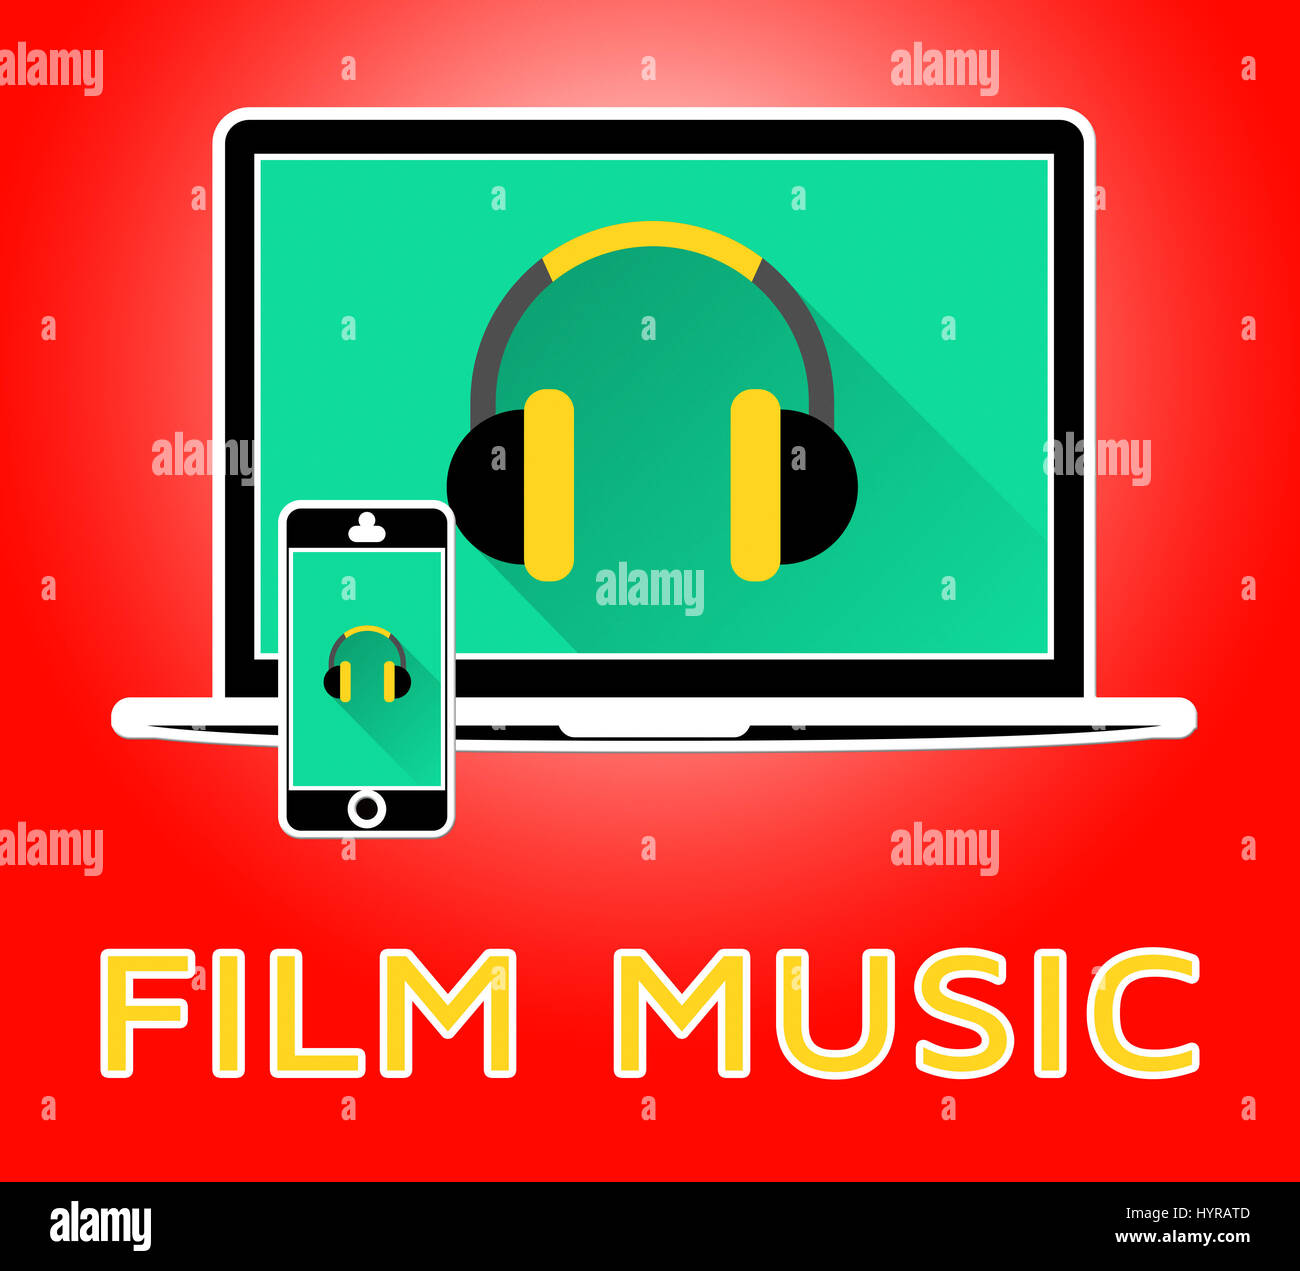 Film Music Meaning Movie Soundtrack 3d Illustration Stock Photo